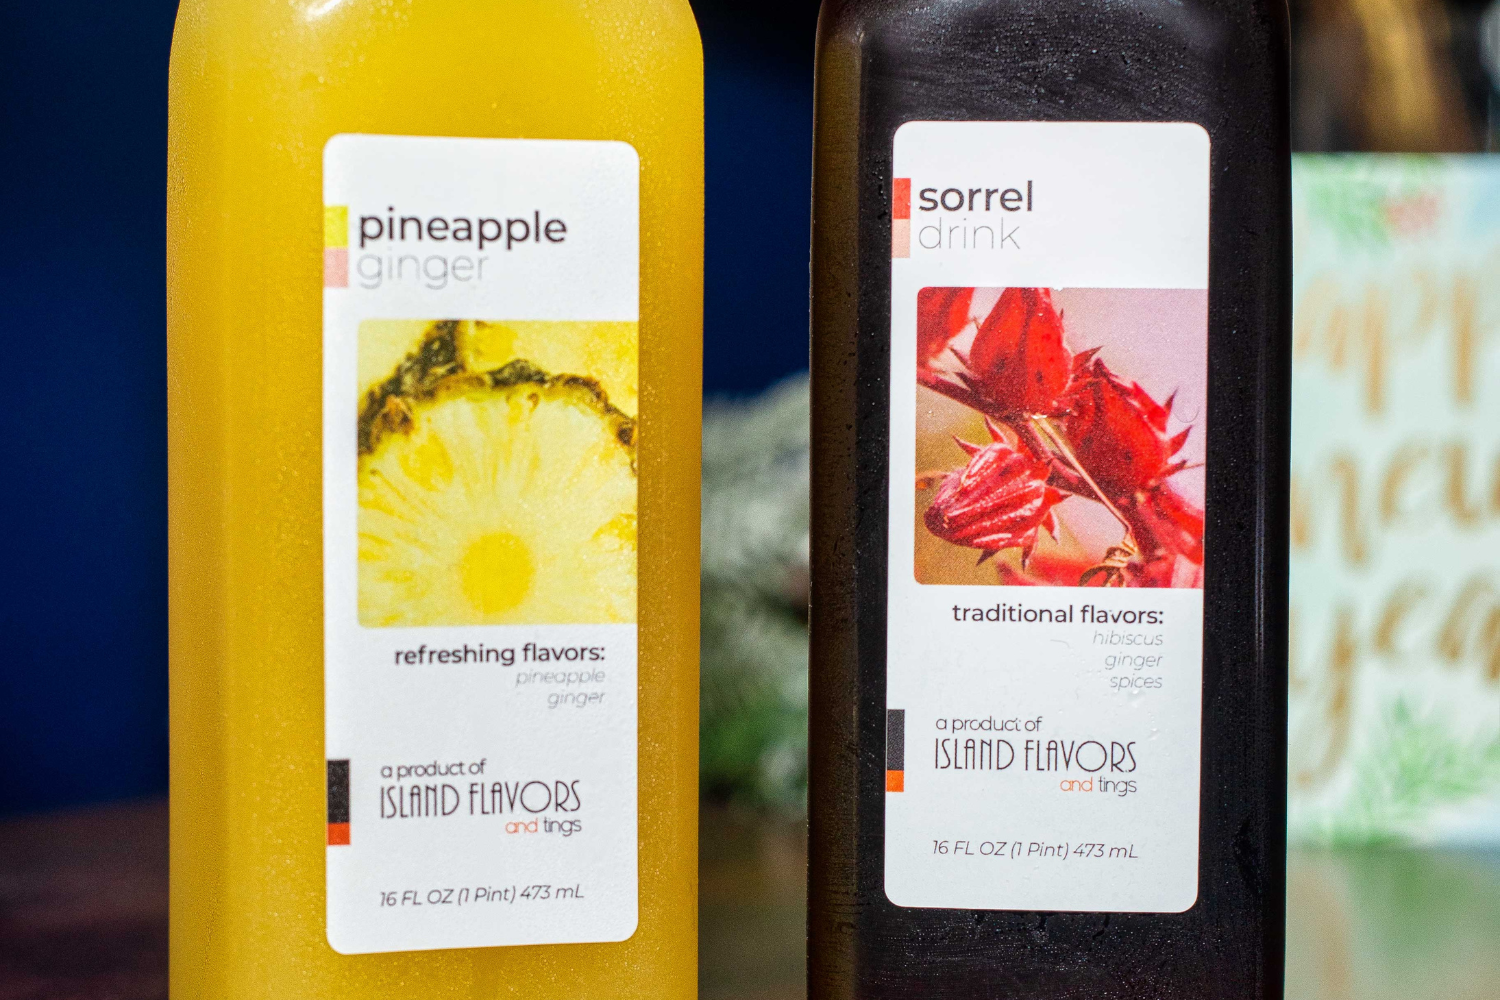 Two bottles labeled "Pineapple Ginger Drink" and "Sorrel Drink" from island flavors, displayed with a focus on their vibrant labels and ingredients.